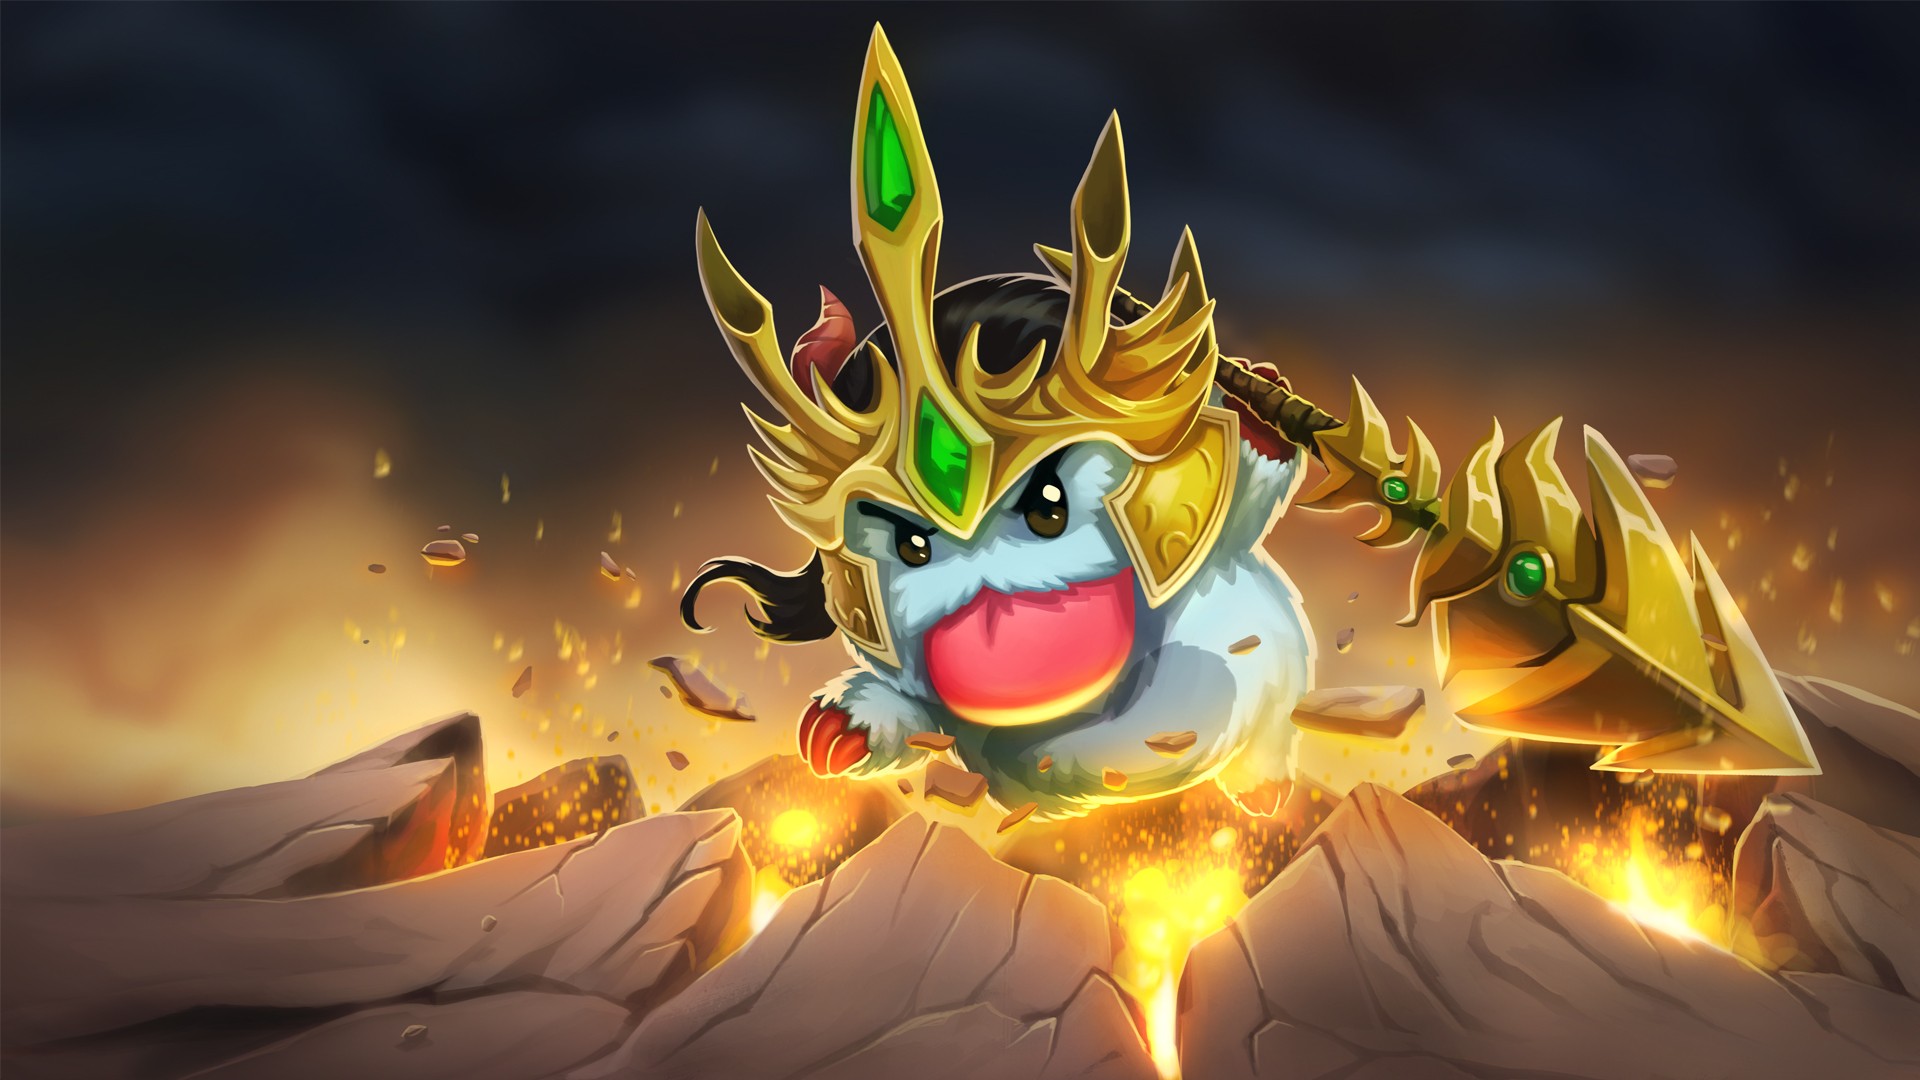 General 1920x1080 League of Legends video game art Jarvan IV (League of Legends) Poro (League of Legends) PC gaming video game characters digital art